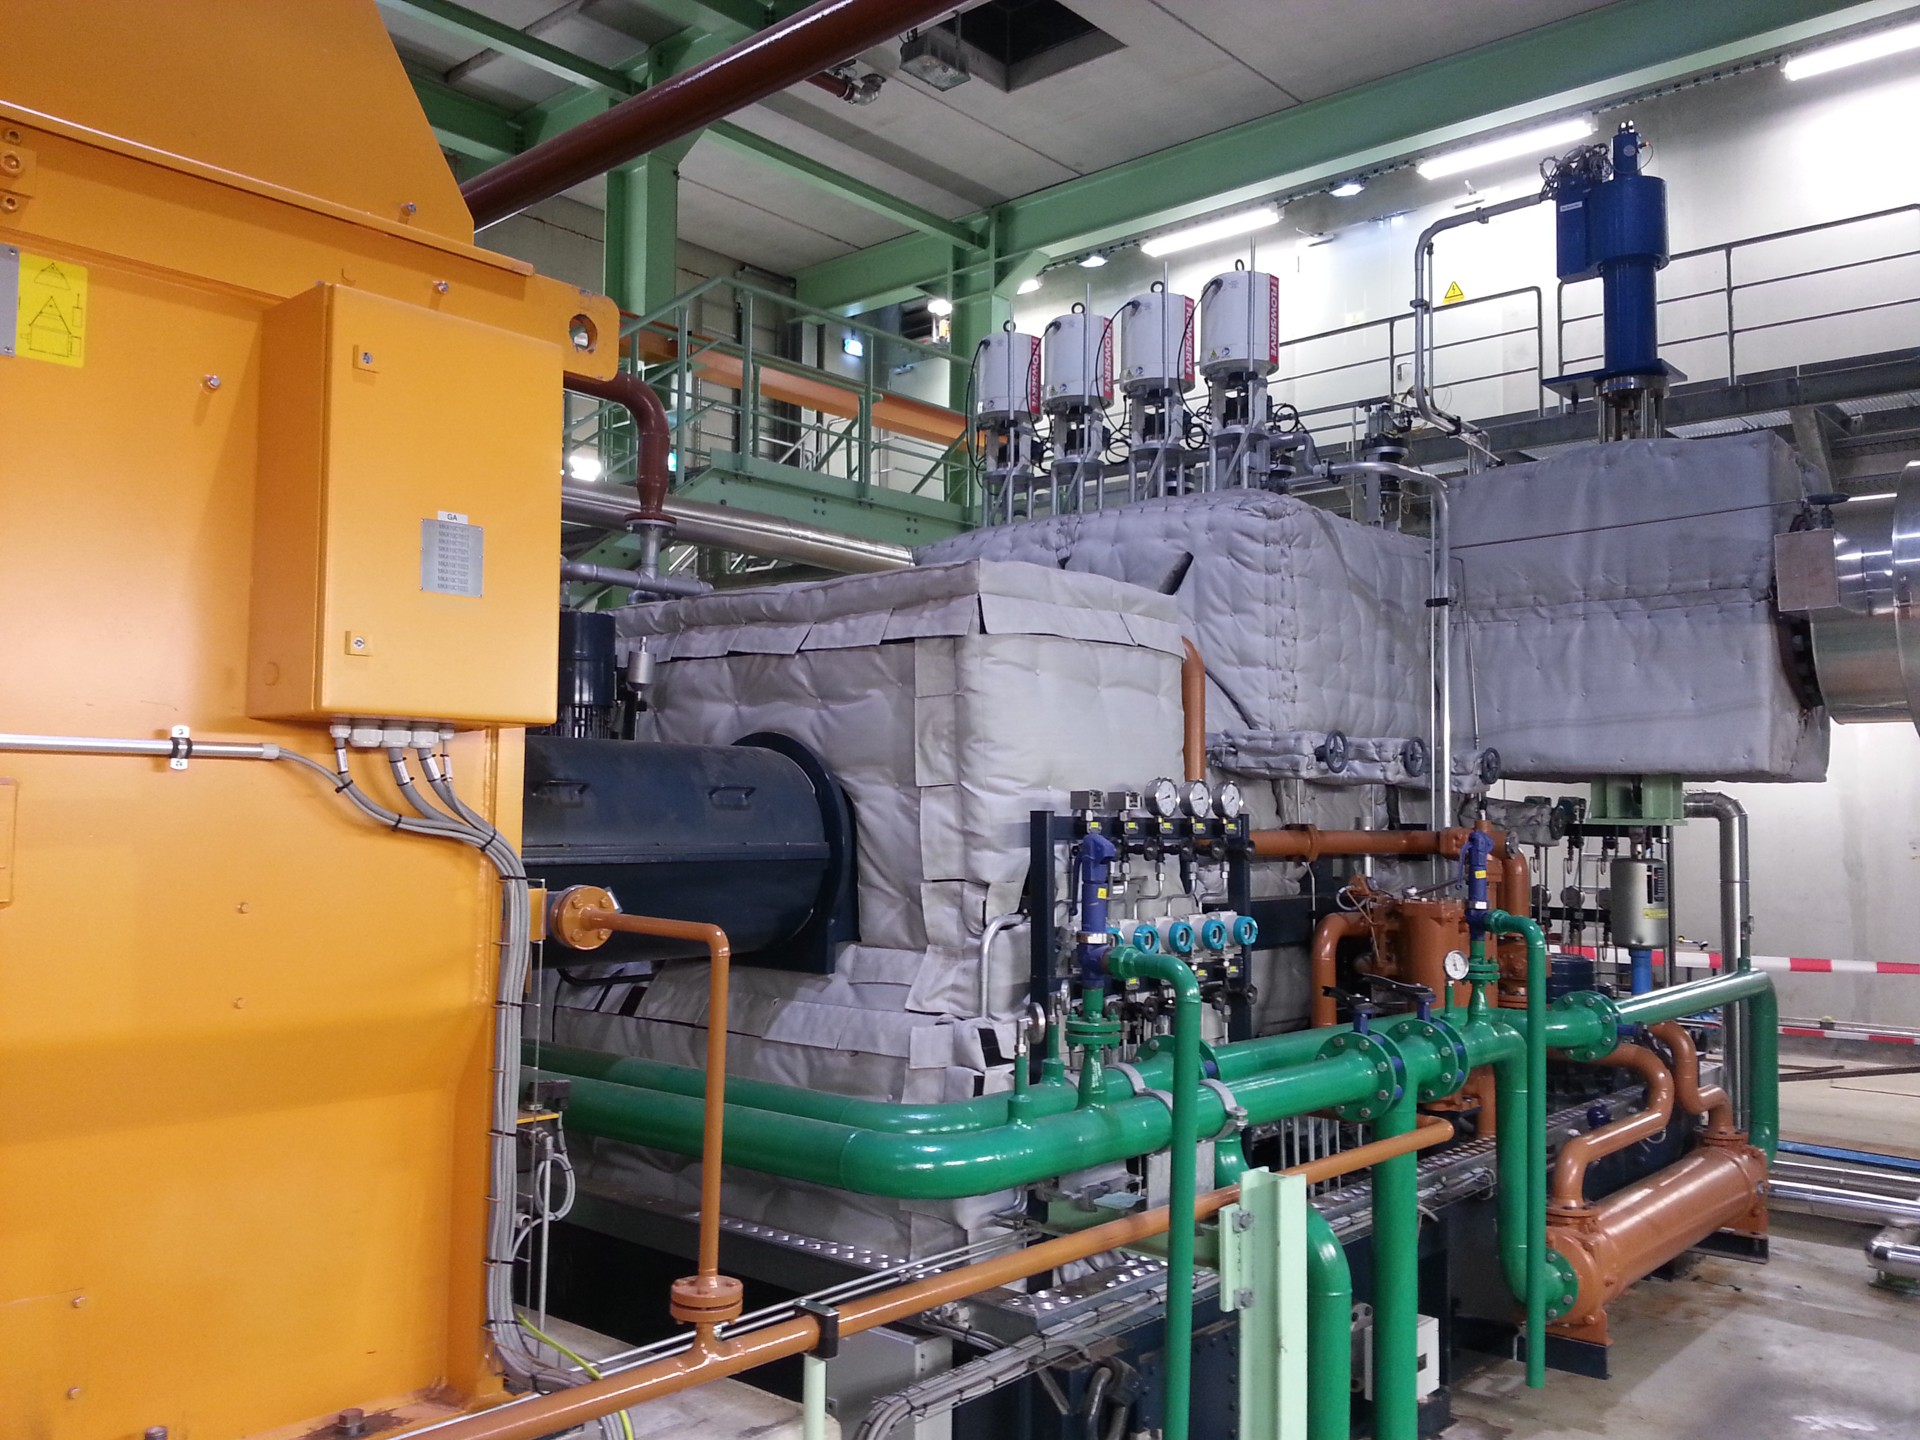 Cogeneration plant generates district heating and electricity